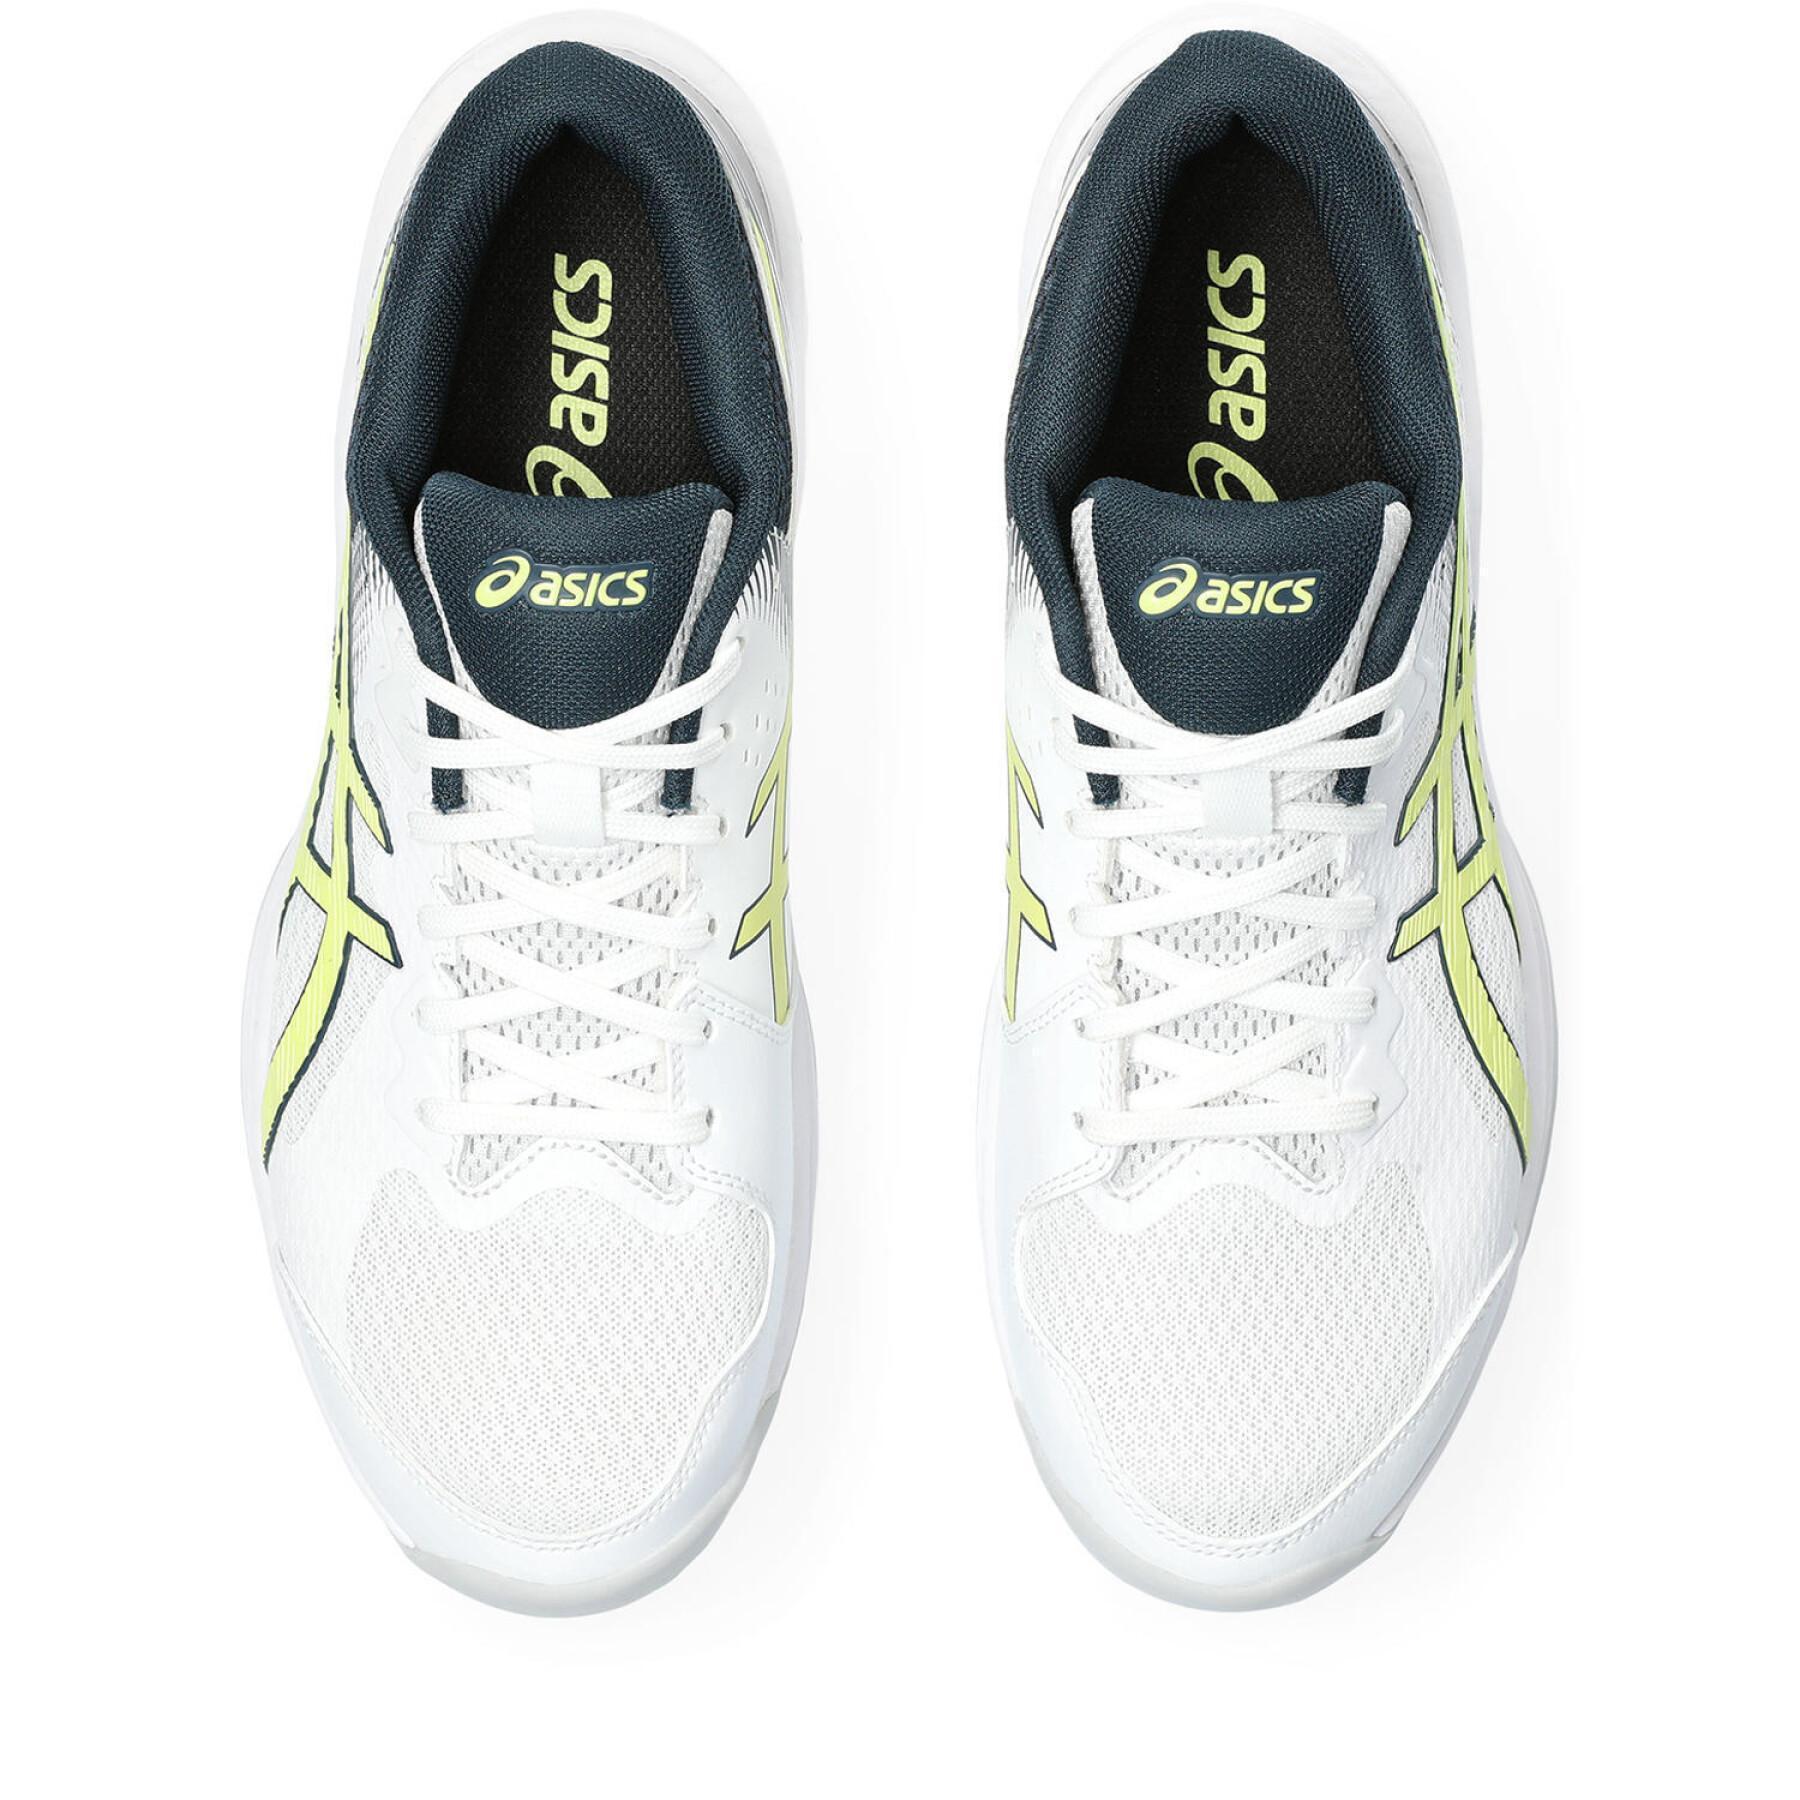 Chaussures indoor Asics Beyond FF